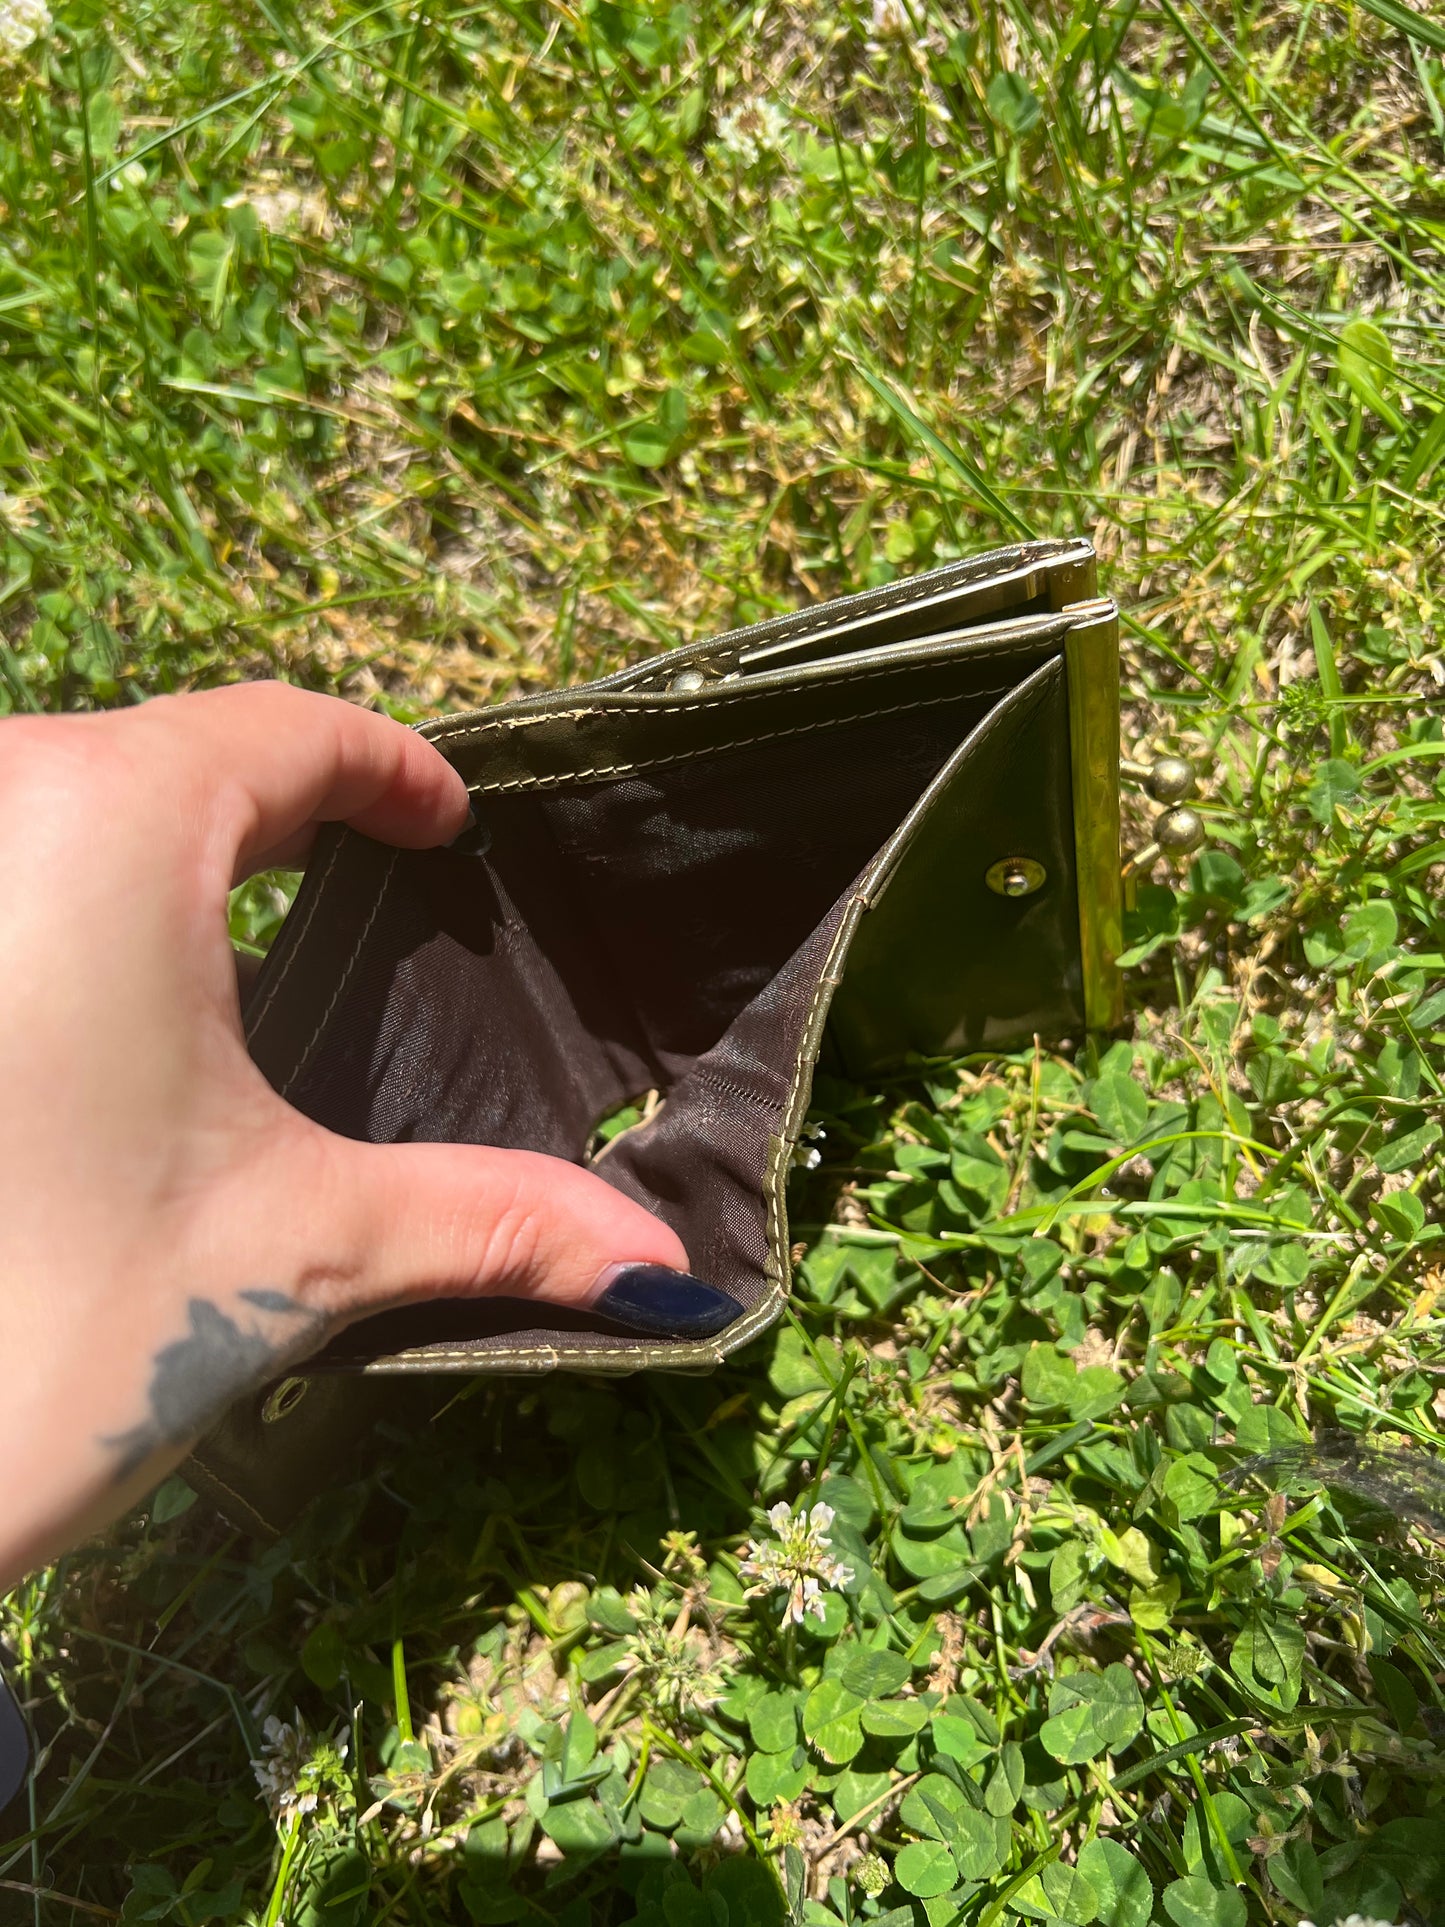 The Canopy Wallet